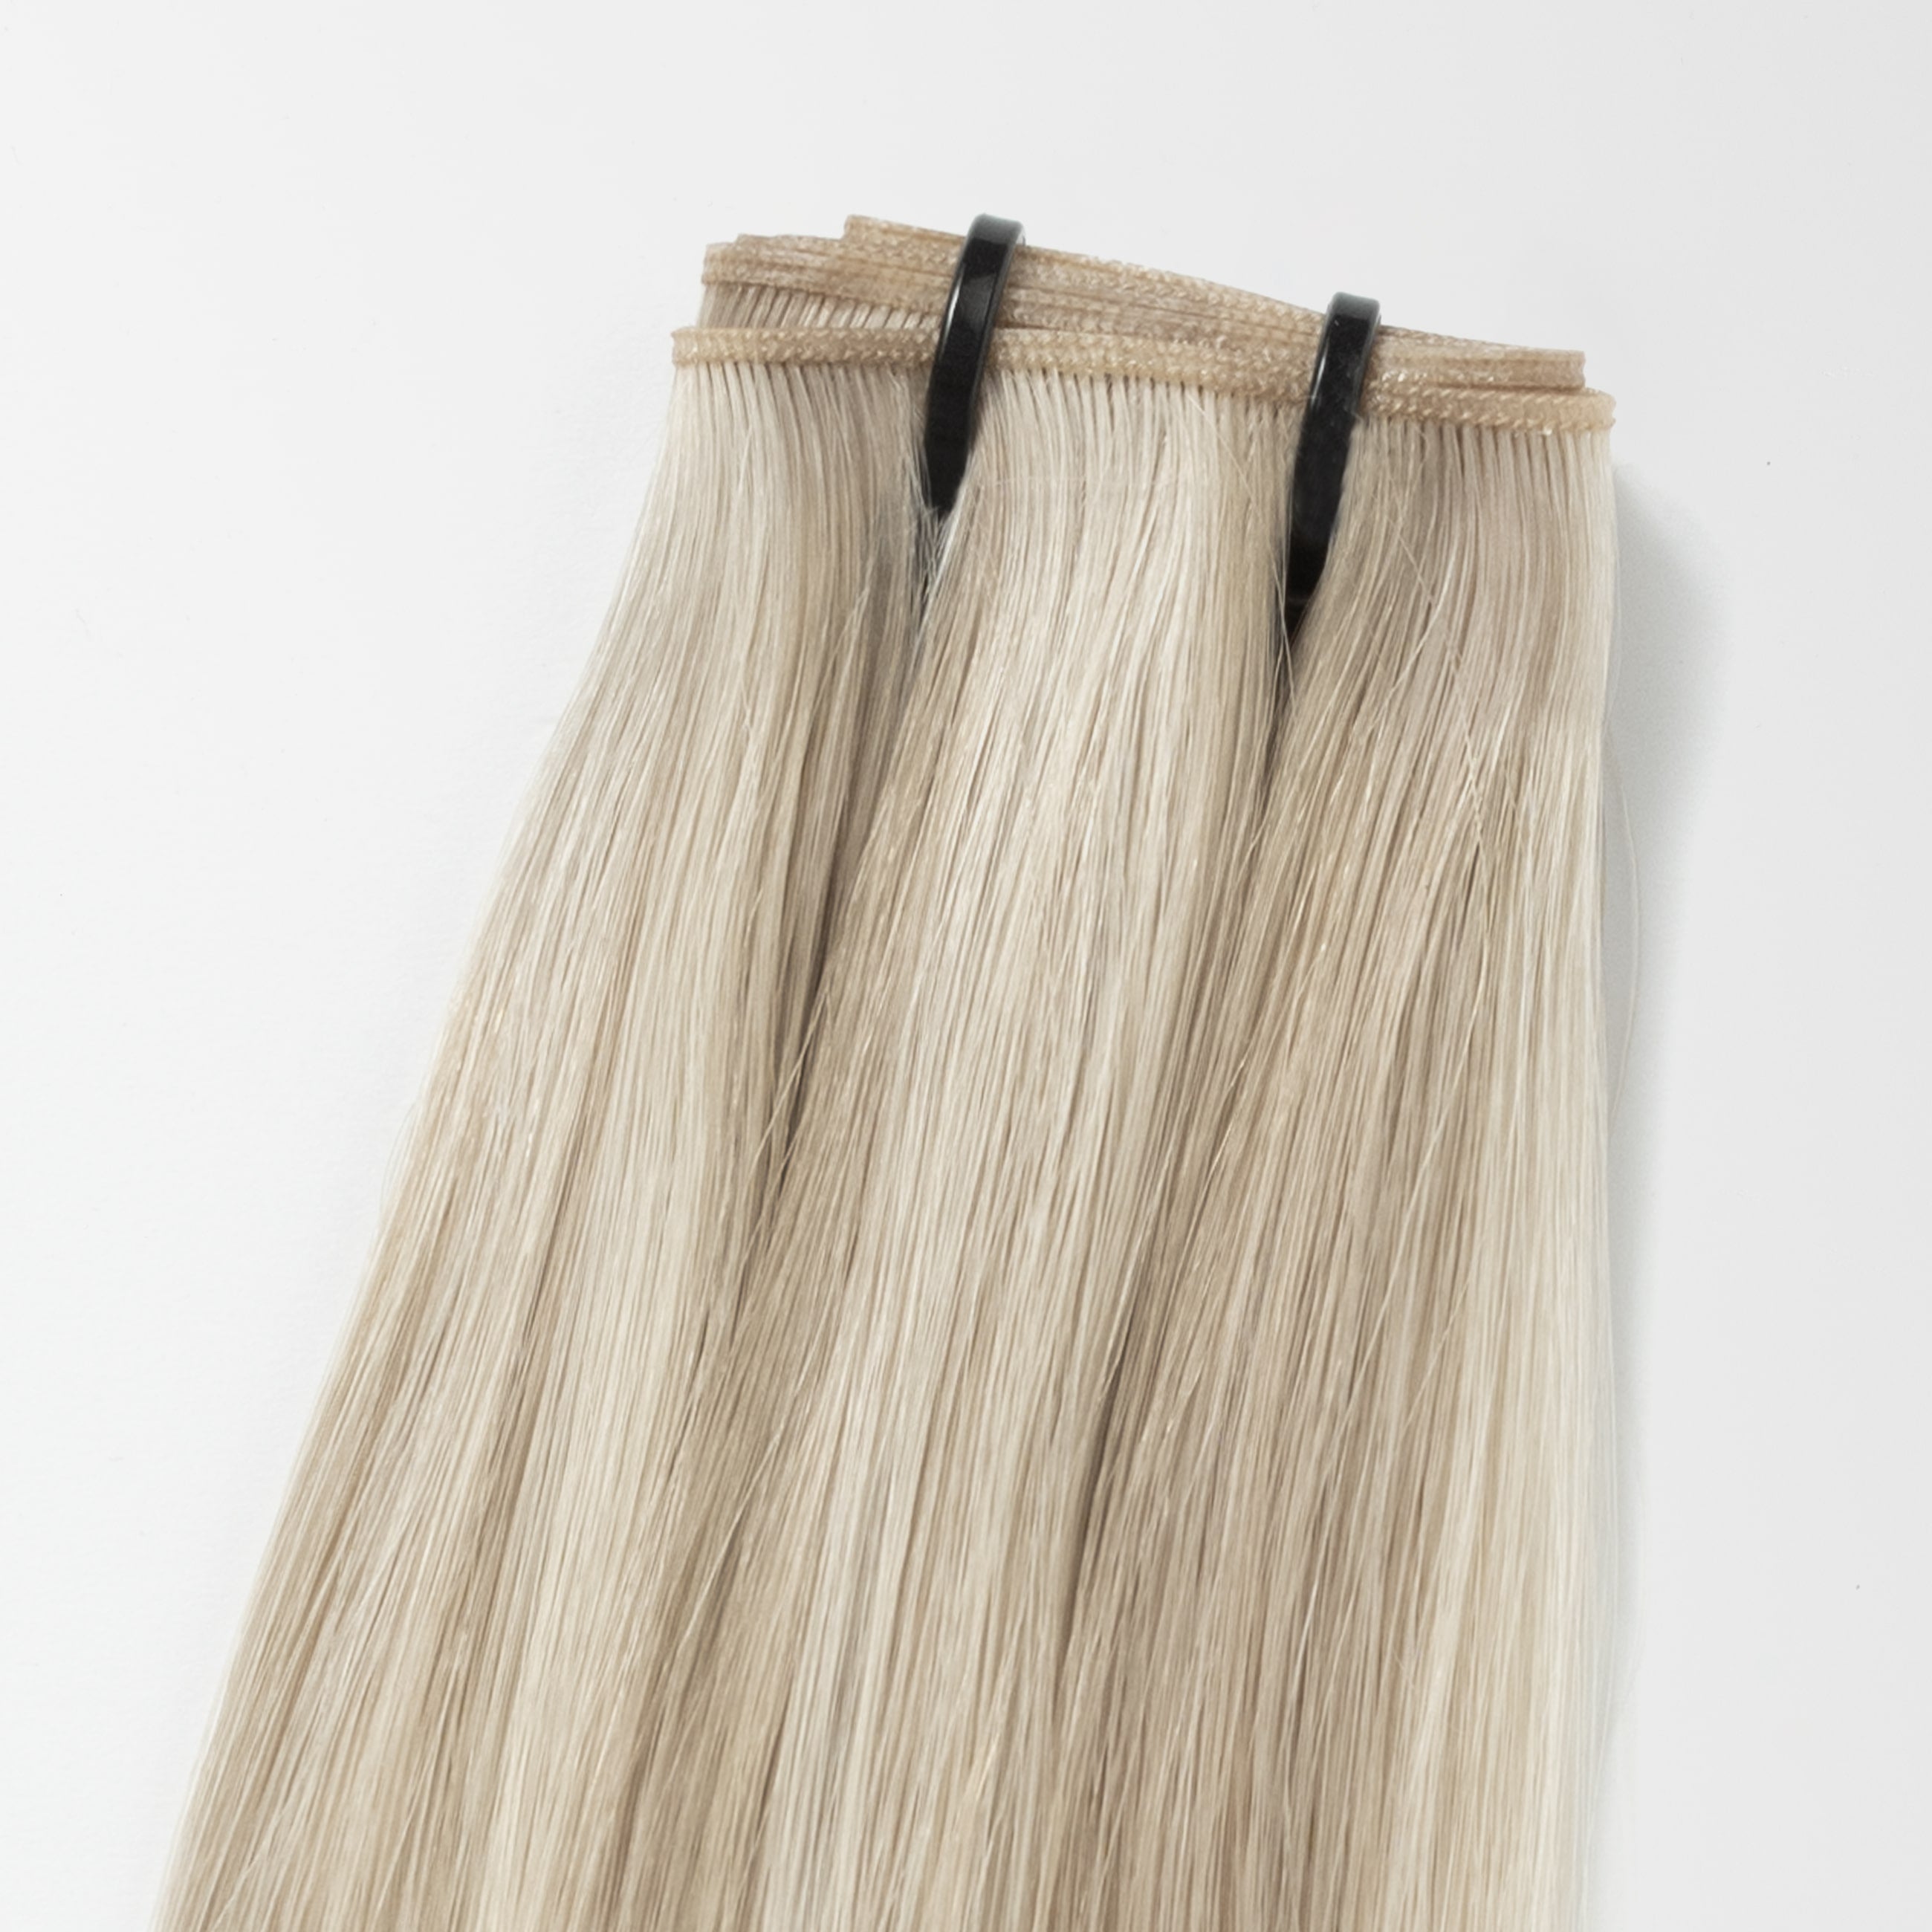 Invisible weft - Ash Blonde Mix 14B/70B